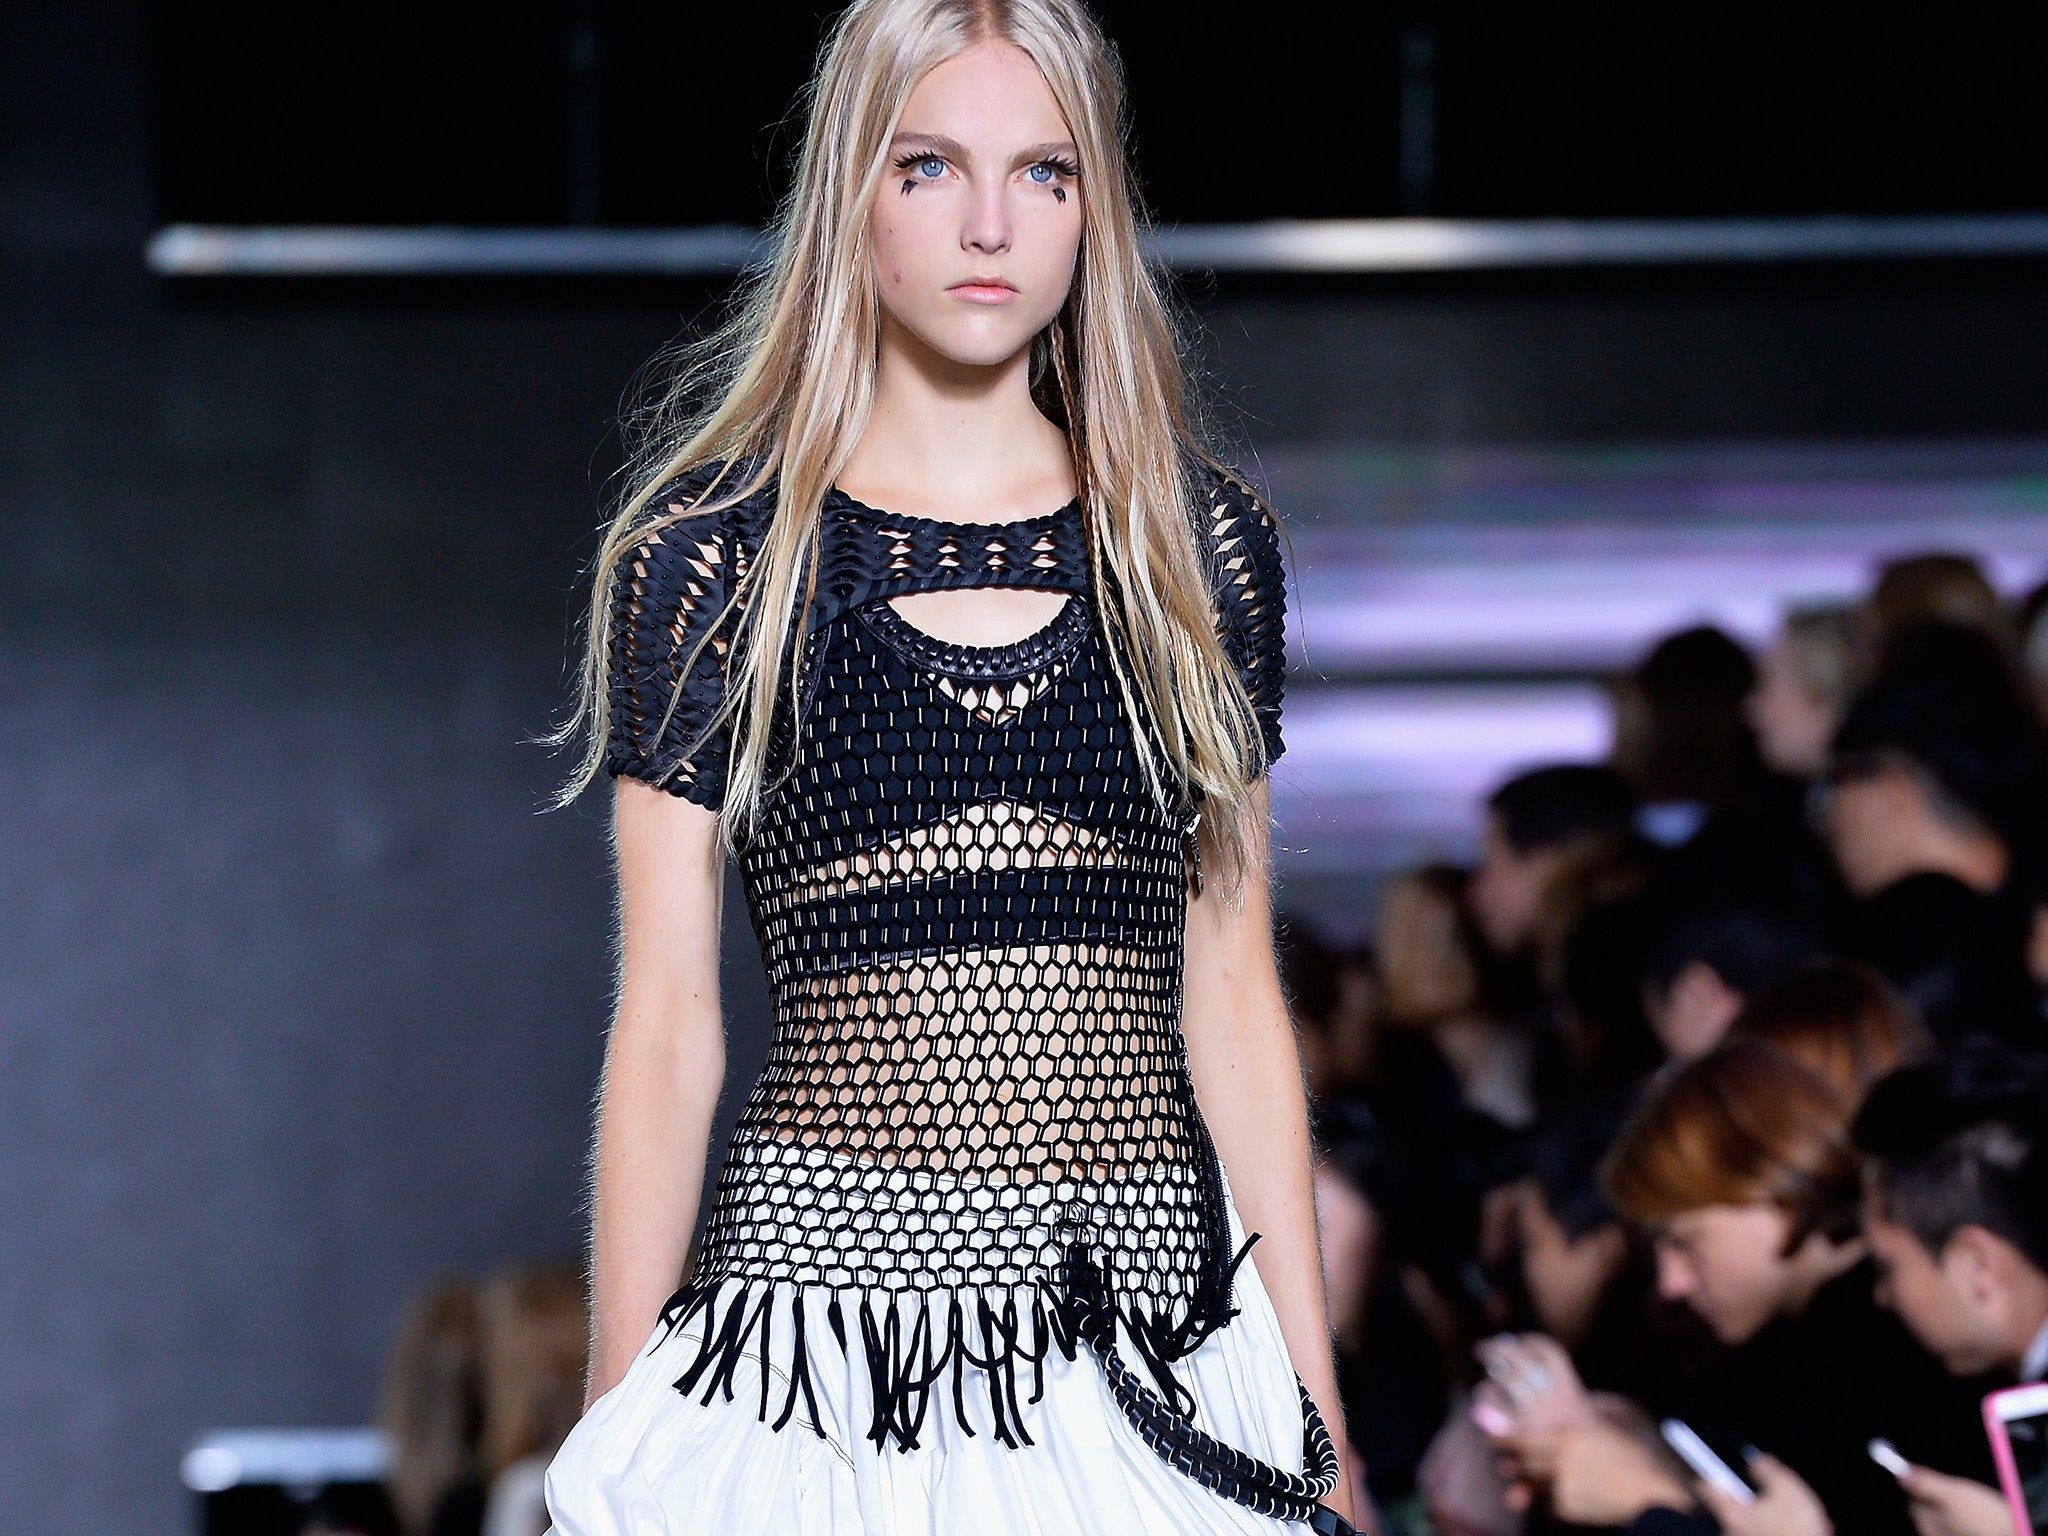 Mesh featured heavily in the Louis Vuitton spring/summer 2016 collection